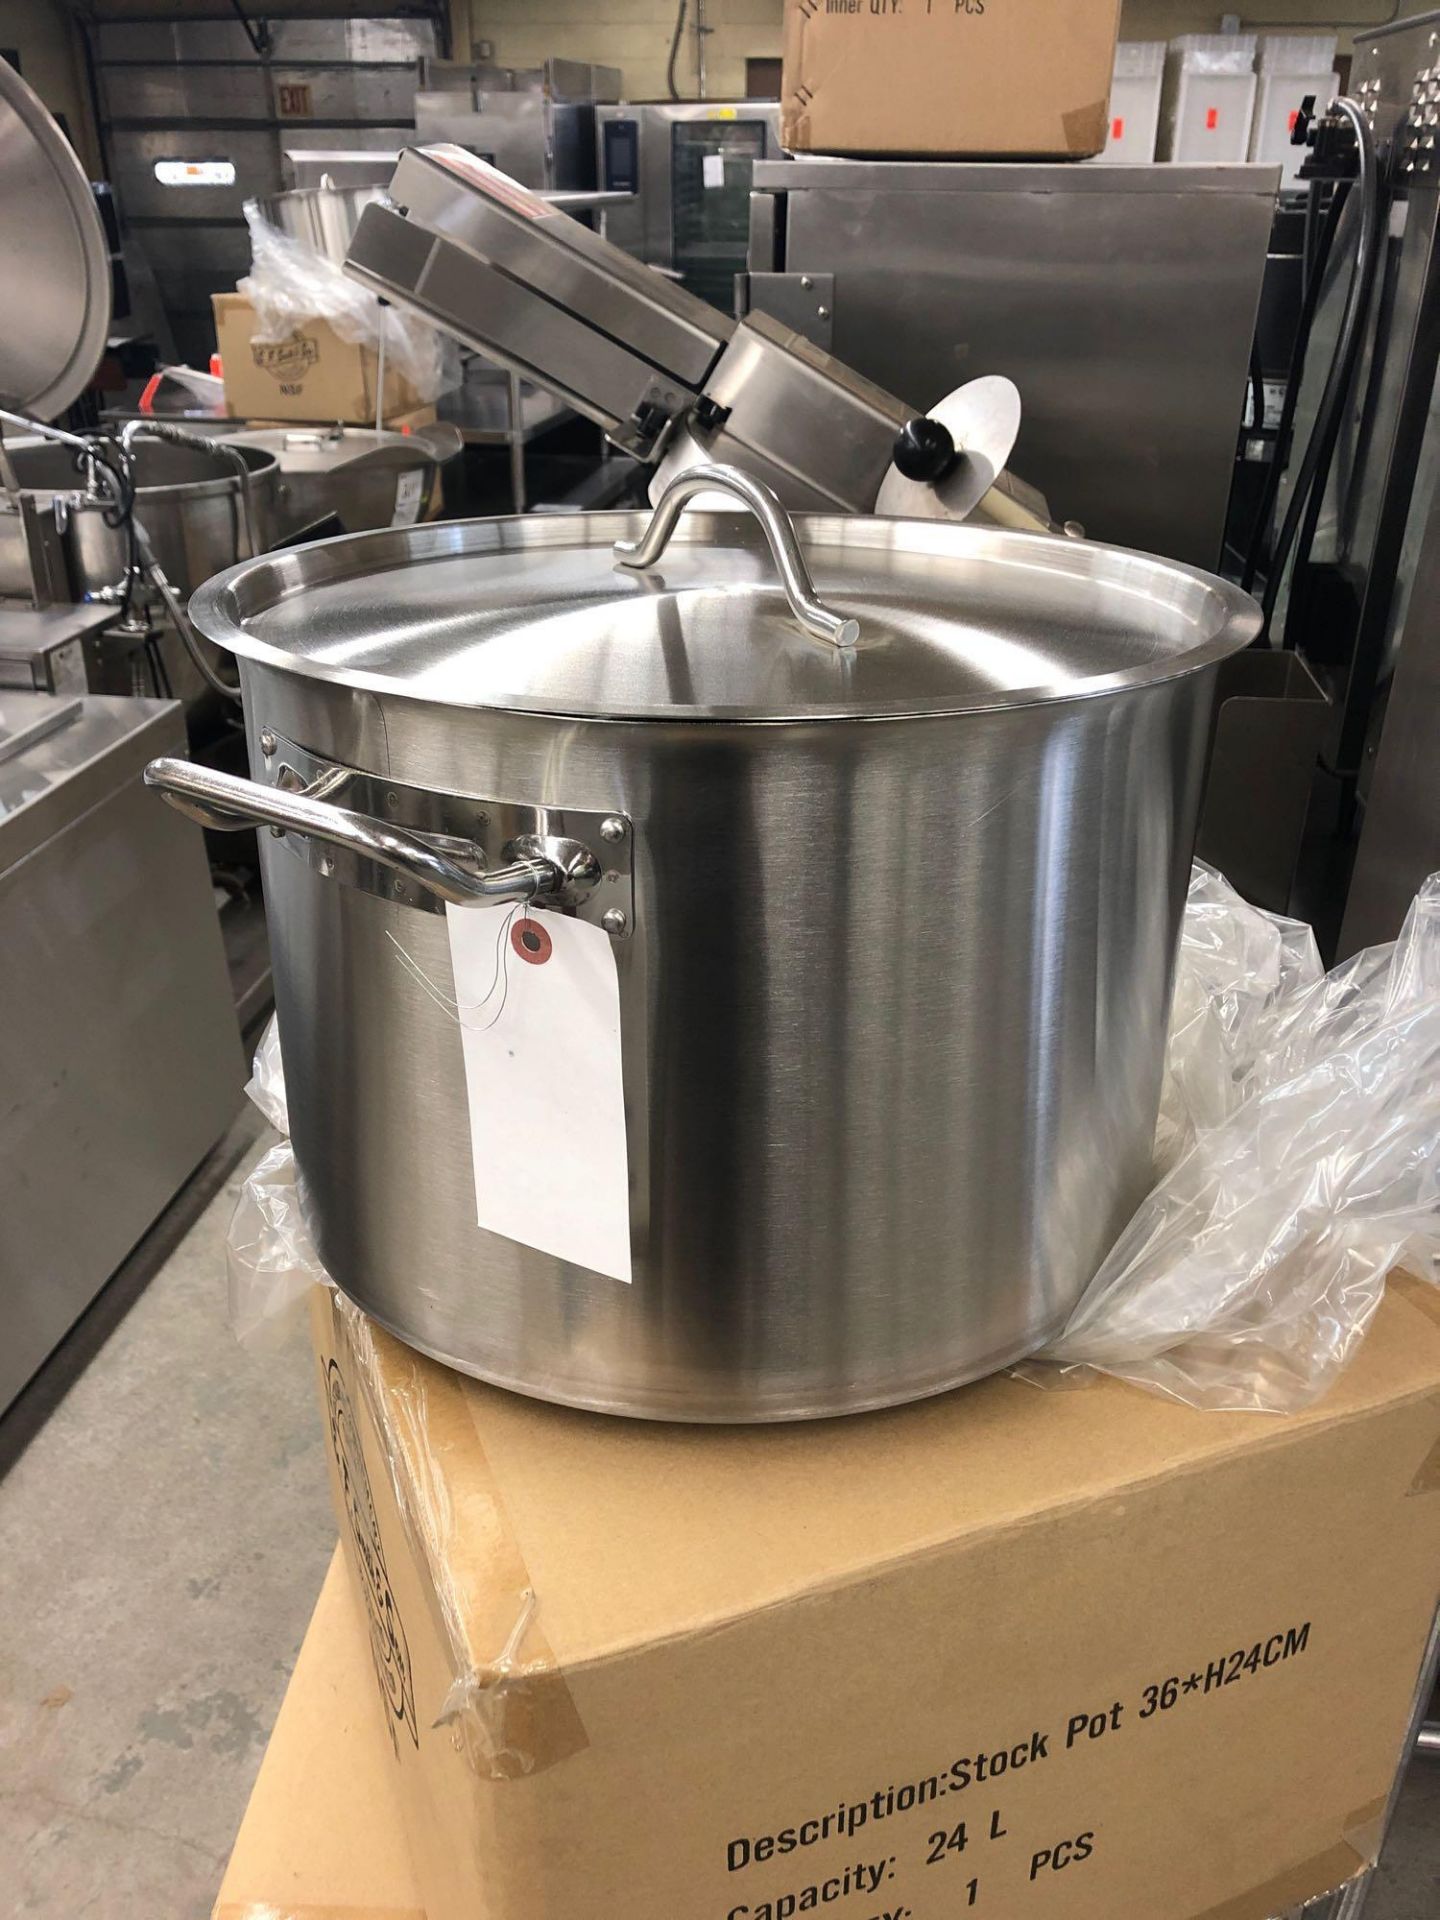 24 L stainless steel stock pot